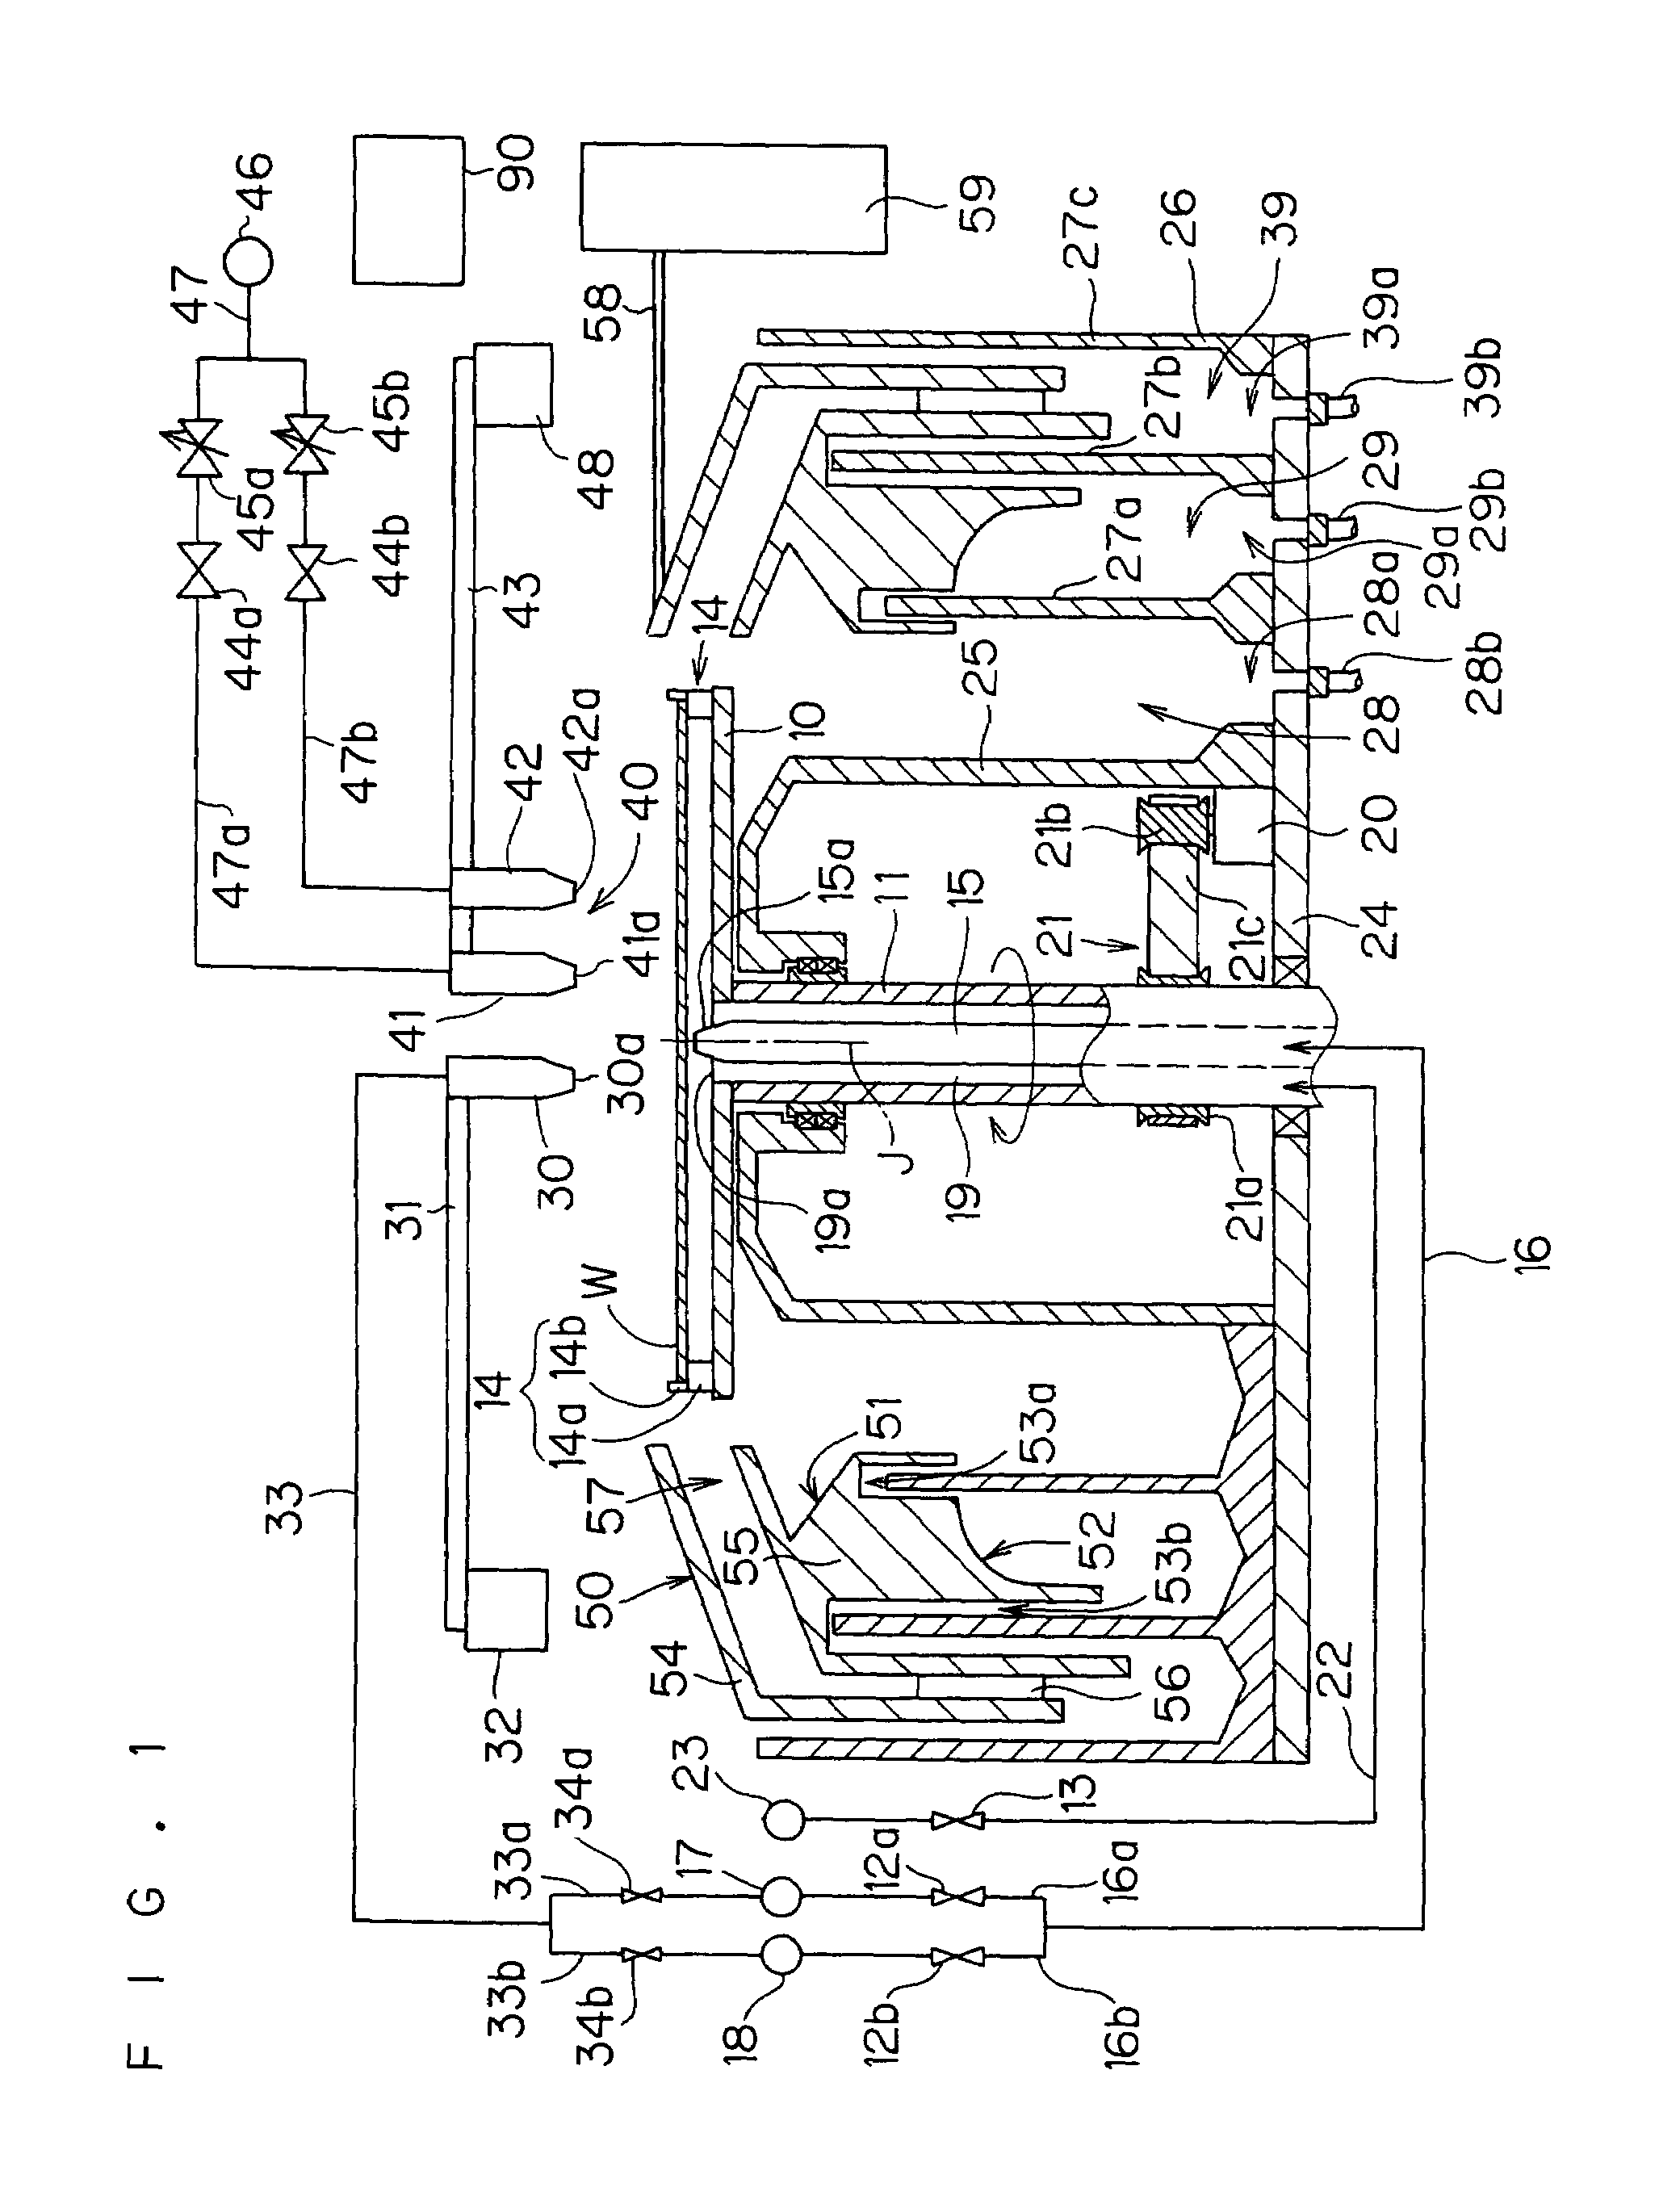 Substrate processing apparatus and substrate processing method drying substrate by spraying gas